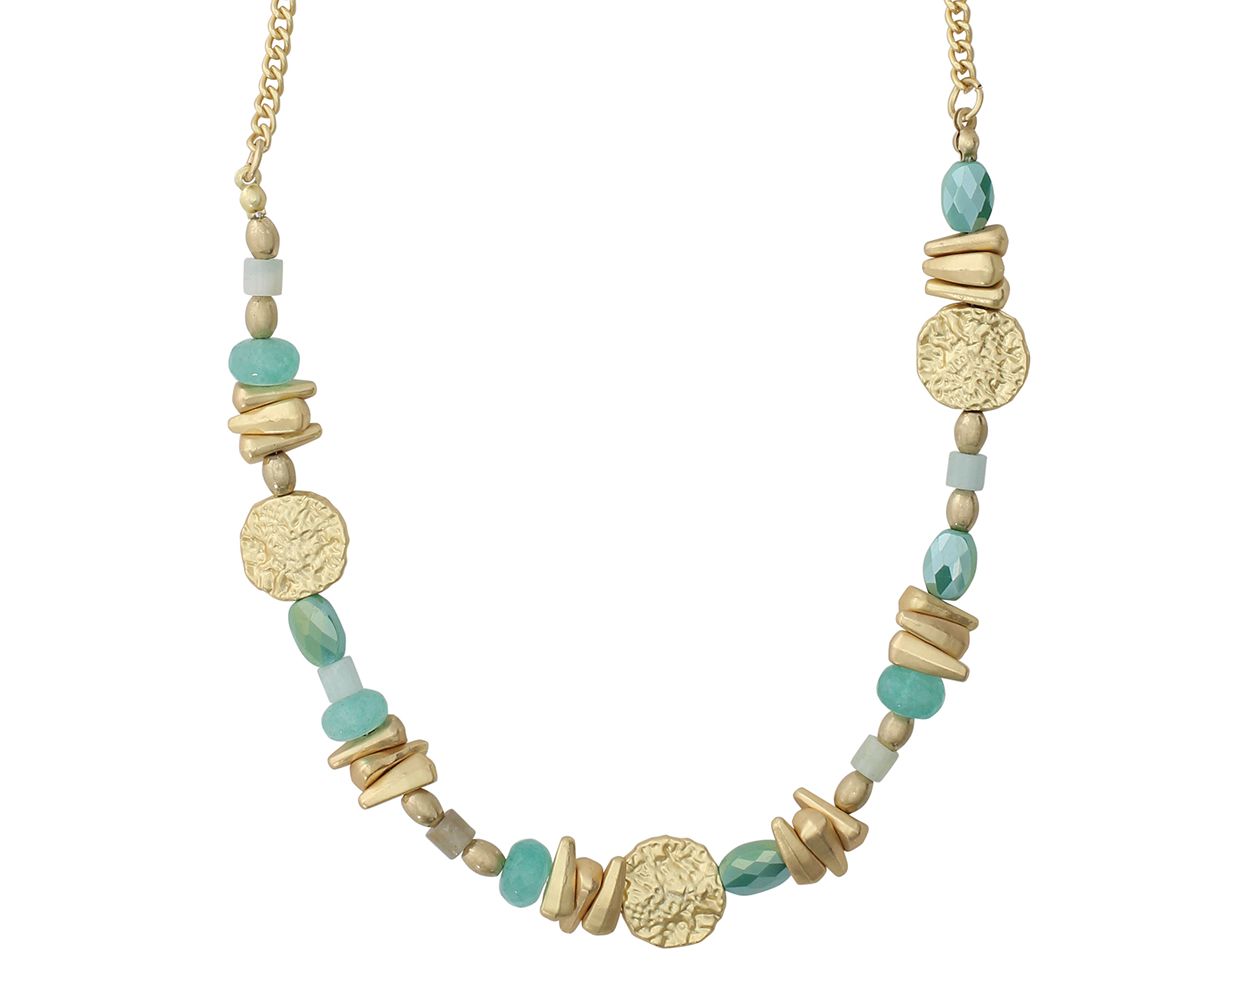 Periwinkle Aqua Beaded and Disc Necklace